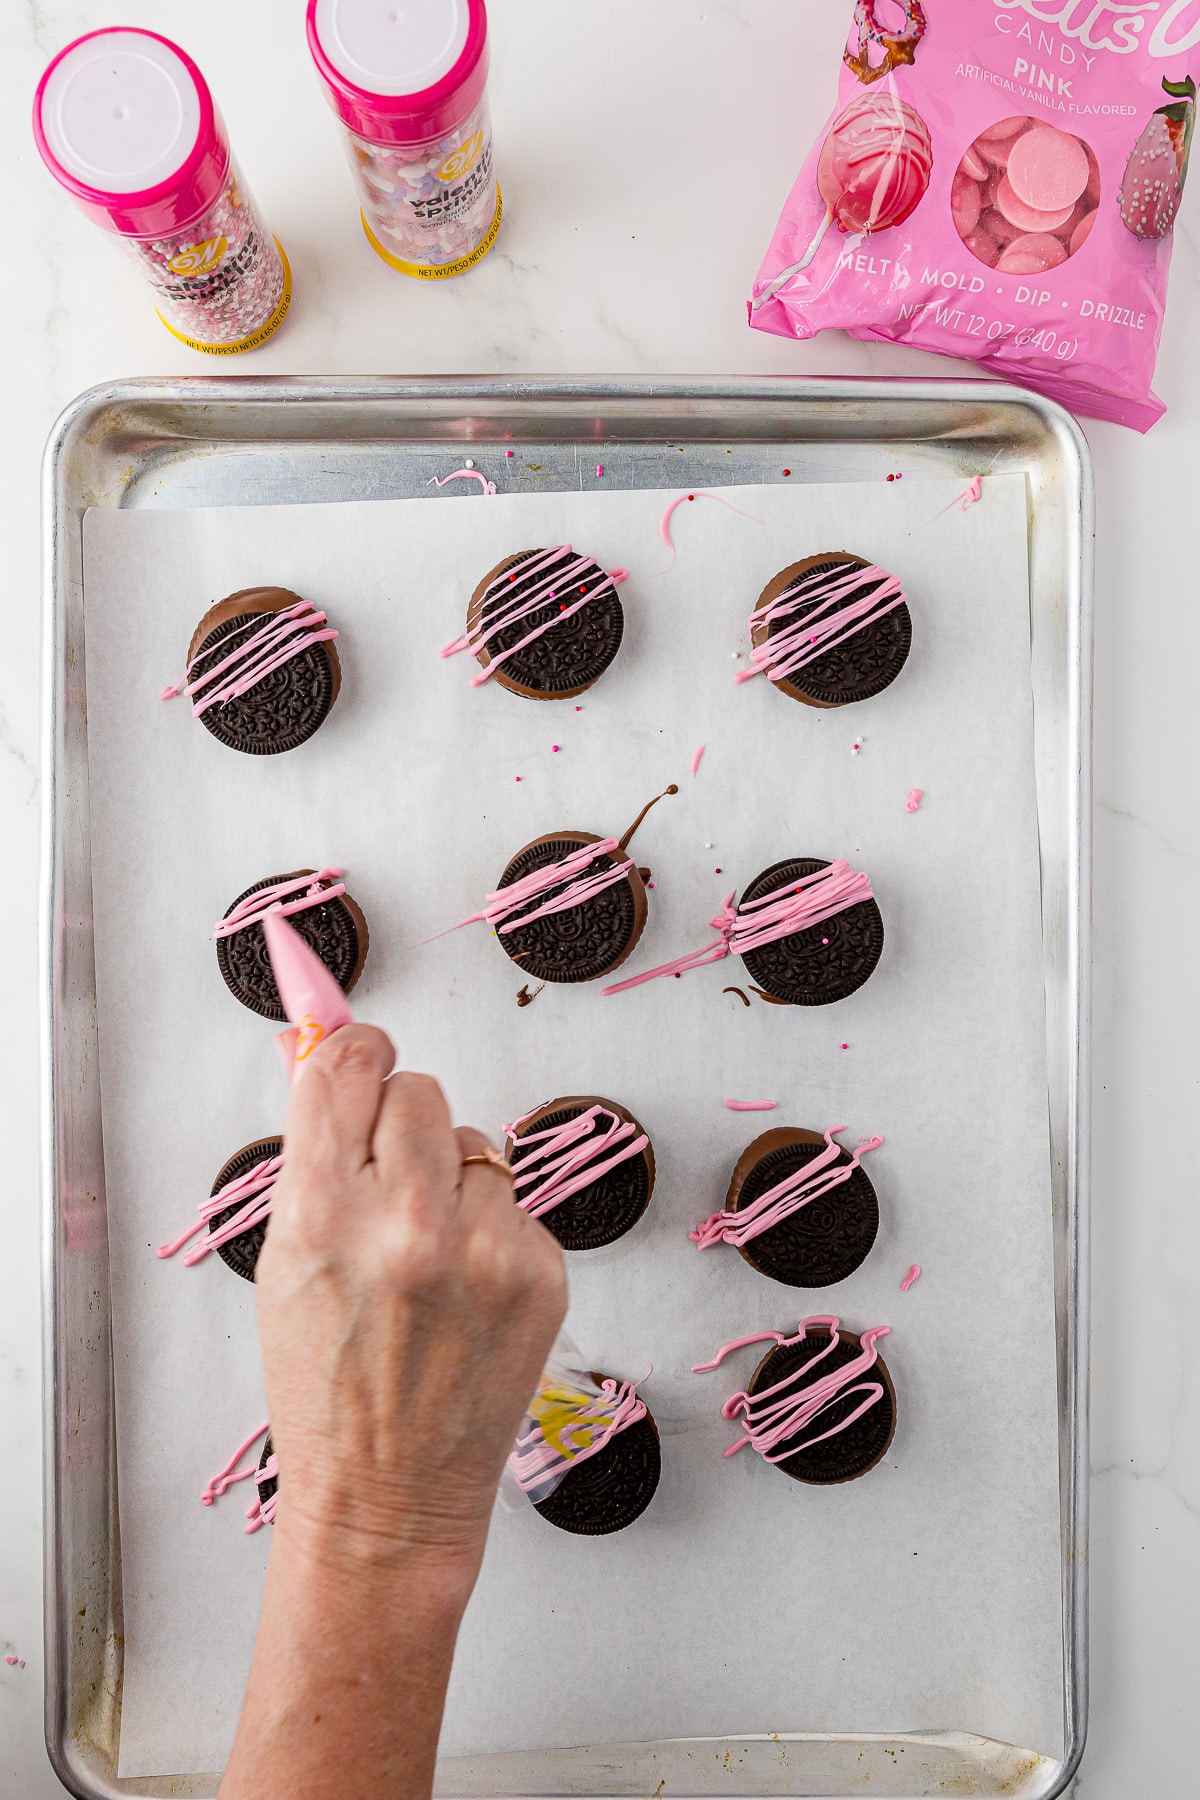 12 reese's oreos decorated for valentine's day with pink chocolate sitting on parchment paper with sprinkles and Wilton pink cany melts on a white counter